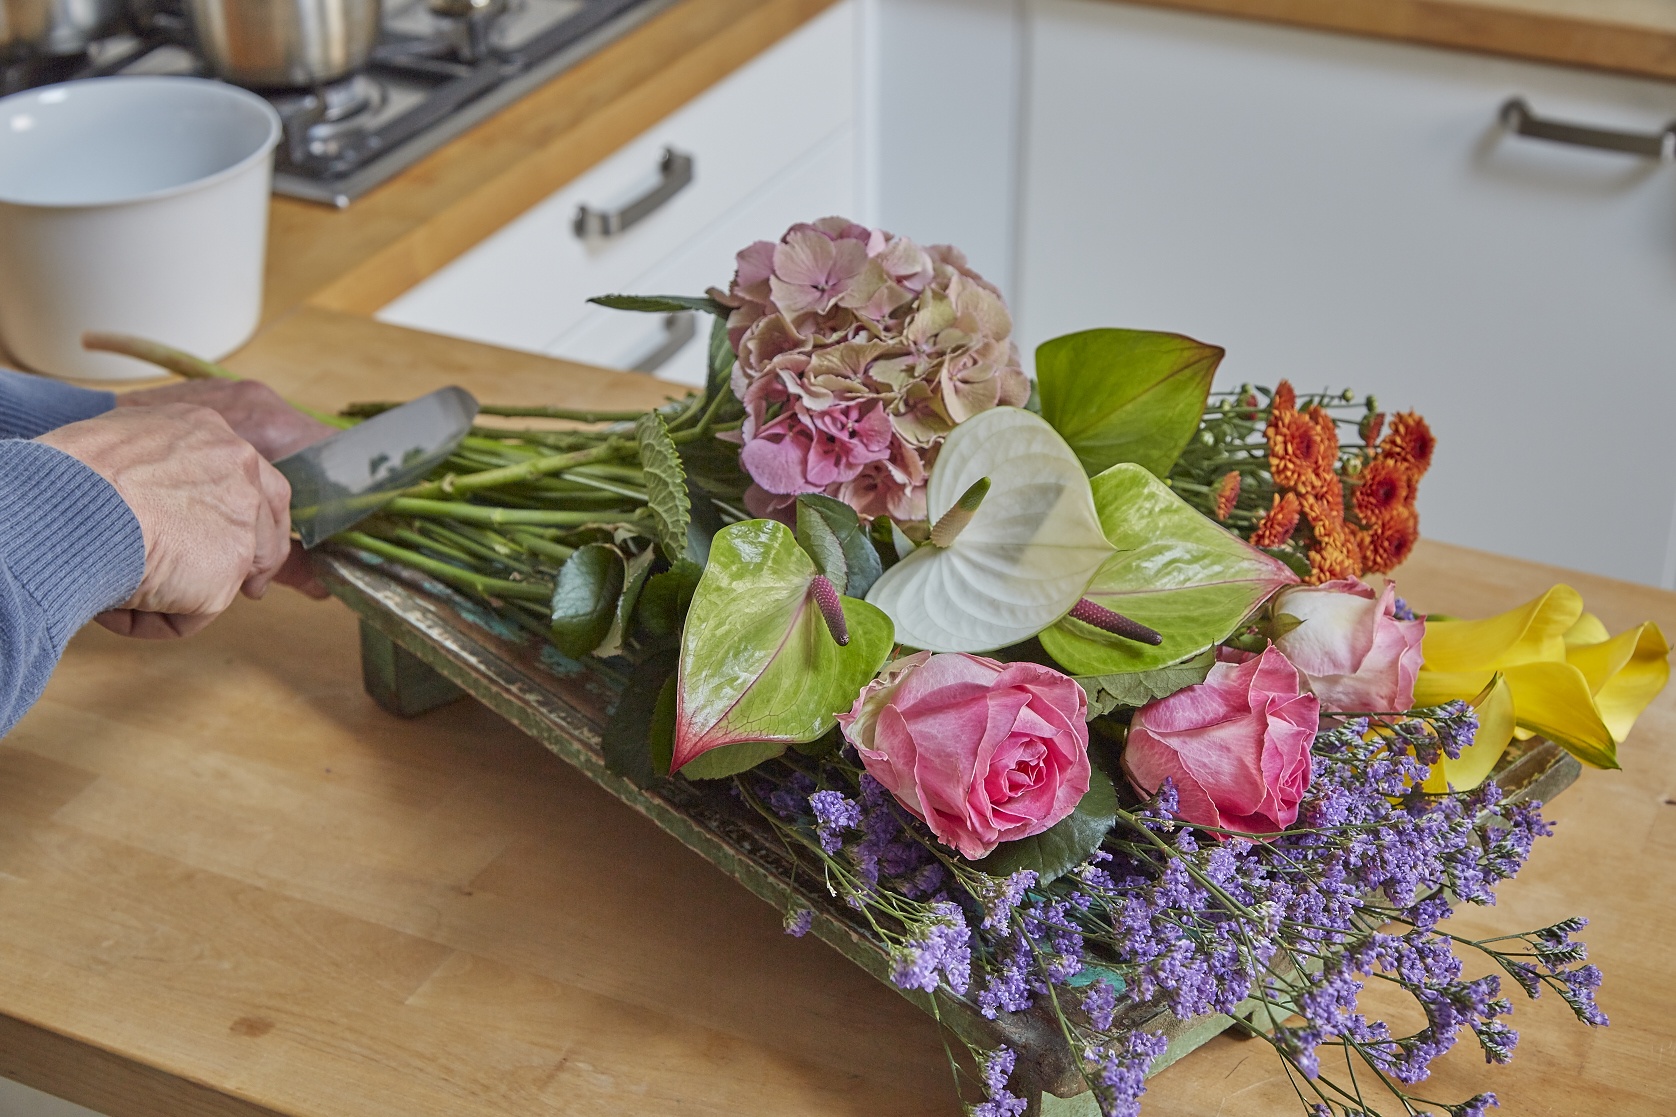 How to make a bunch of cut flowers last even longer